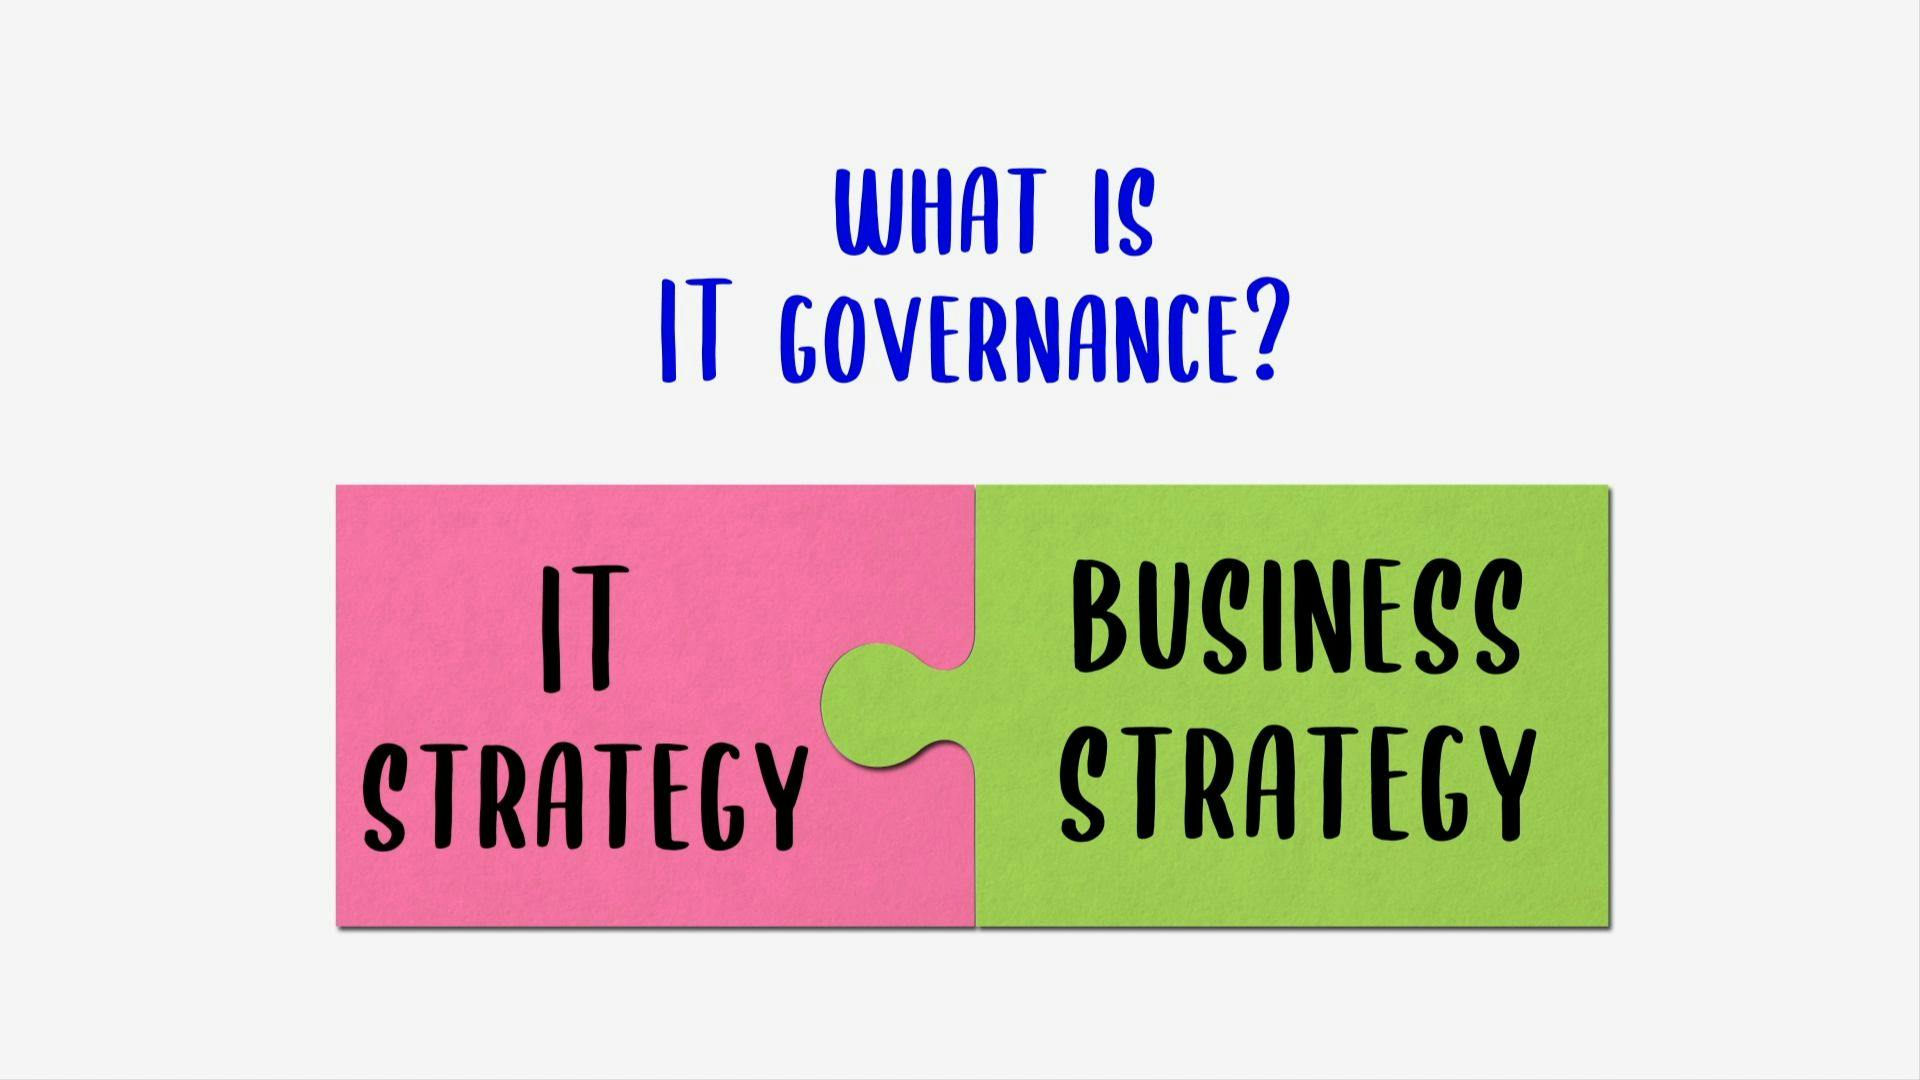 Developing a successful IT governance Strategy